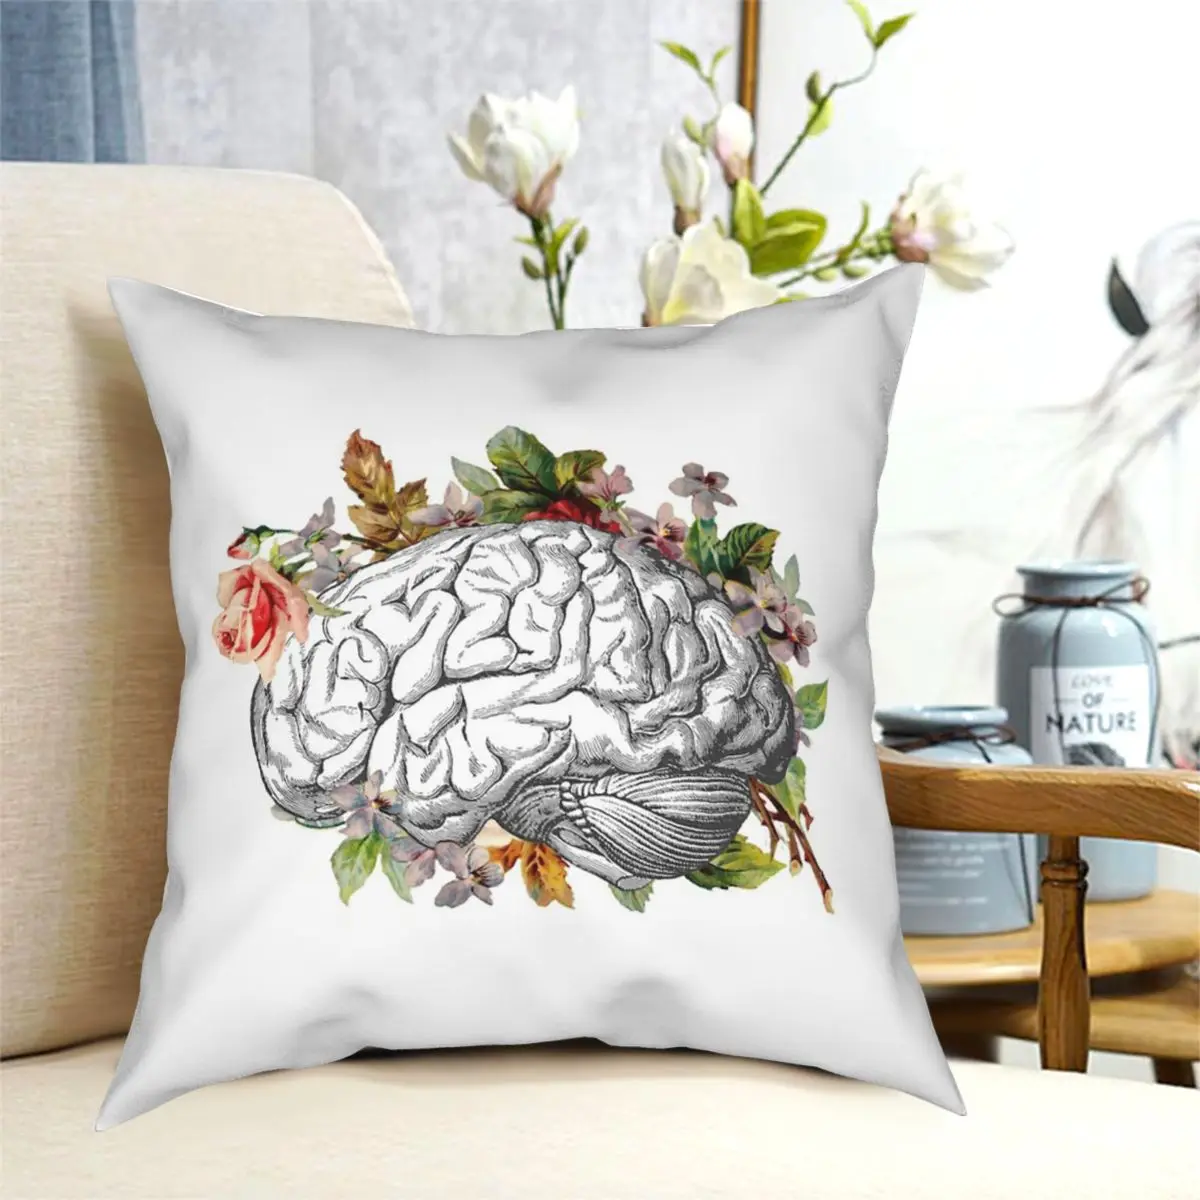 

Brain With Flowers Square Pillowcase Polyester Creative Zip Decorative Throw Pillow Case for Home Cushion Cover Wholesale